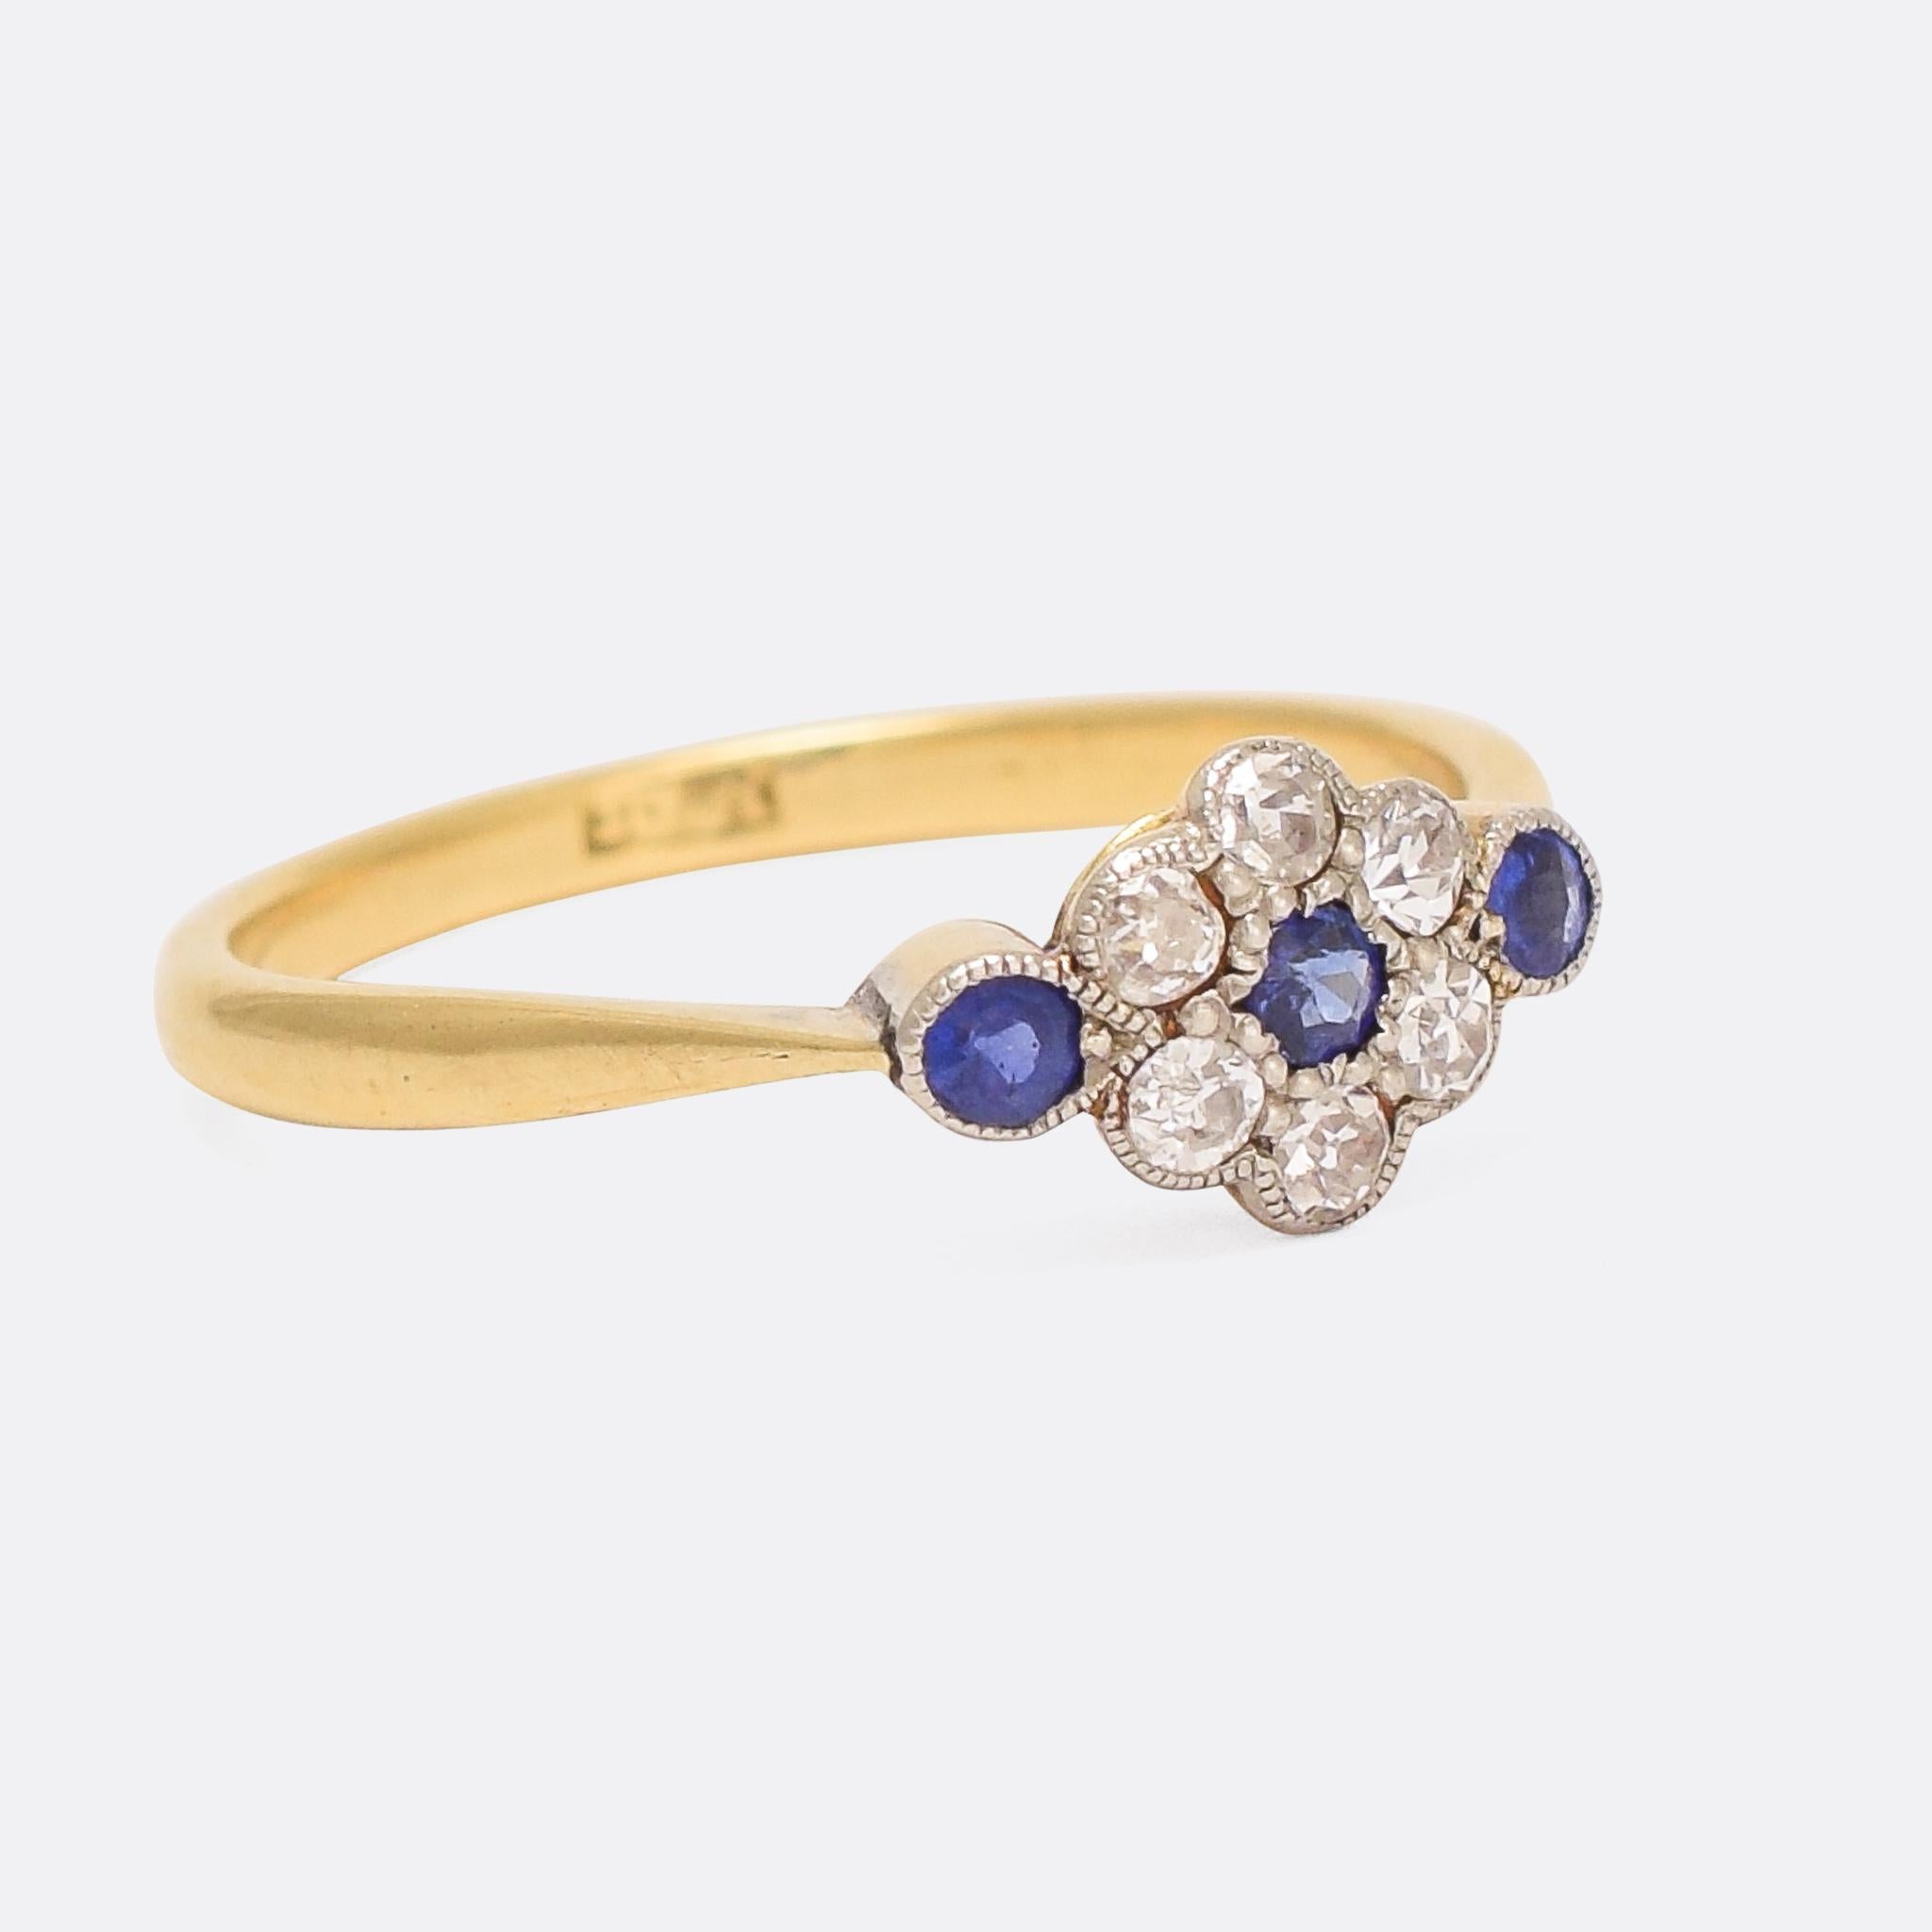 A sweet antique cluster ring with sapphires and diamonds millegrain platinum settings. The head features a central daisy, flanked by two sapphires in teardrop settings. The simple band joins the head with elegant pinched shoulders; it's modelled in